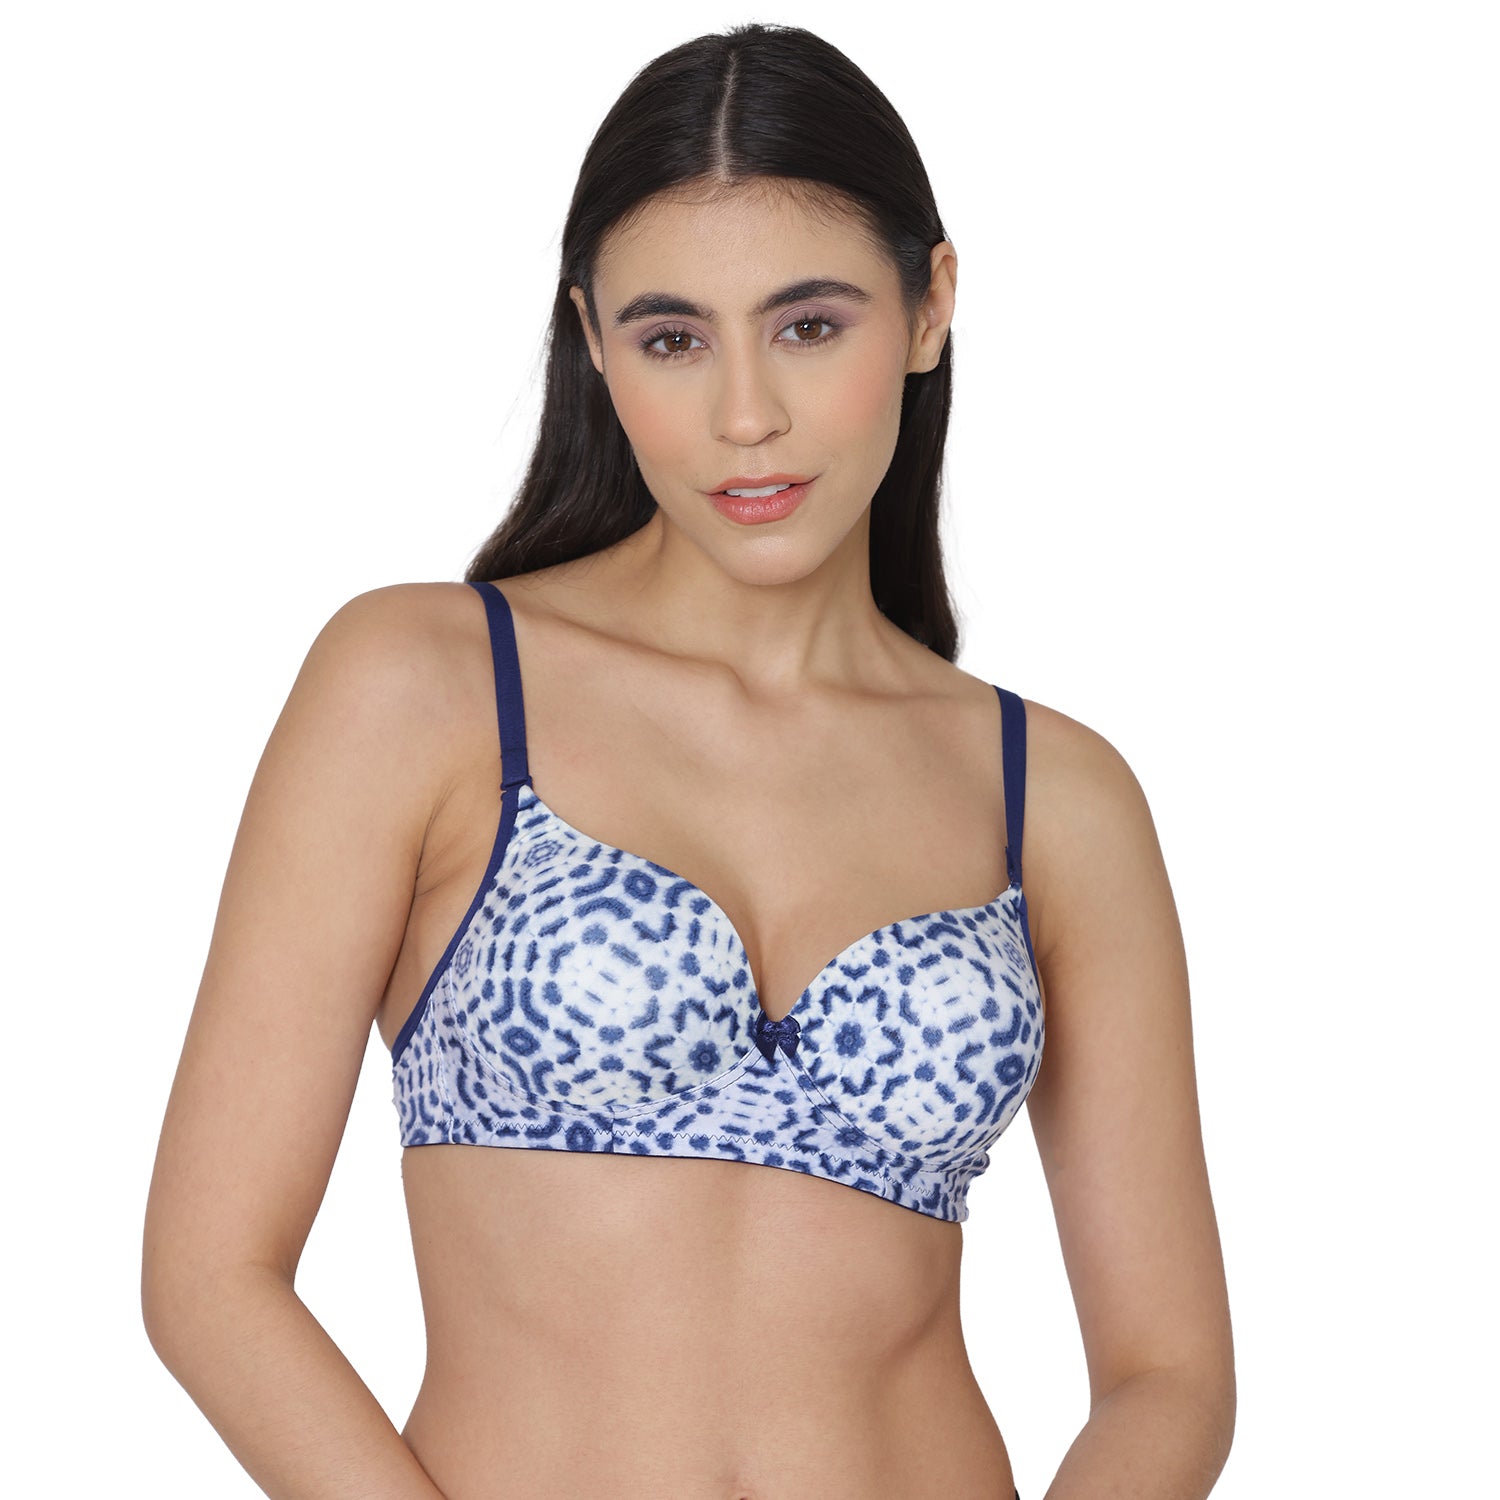 Tweens Padded Non-Wired T-Shirt Bra - Super Soft & Extra Smooth